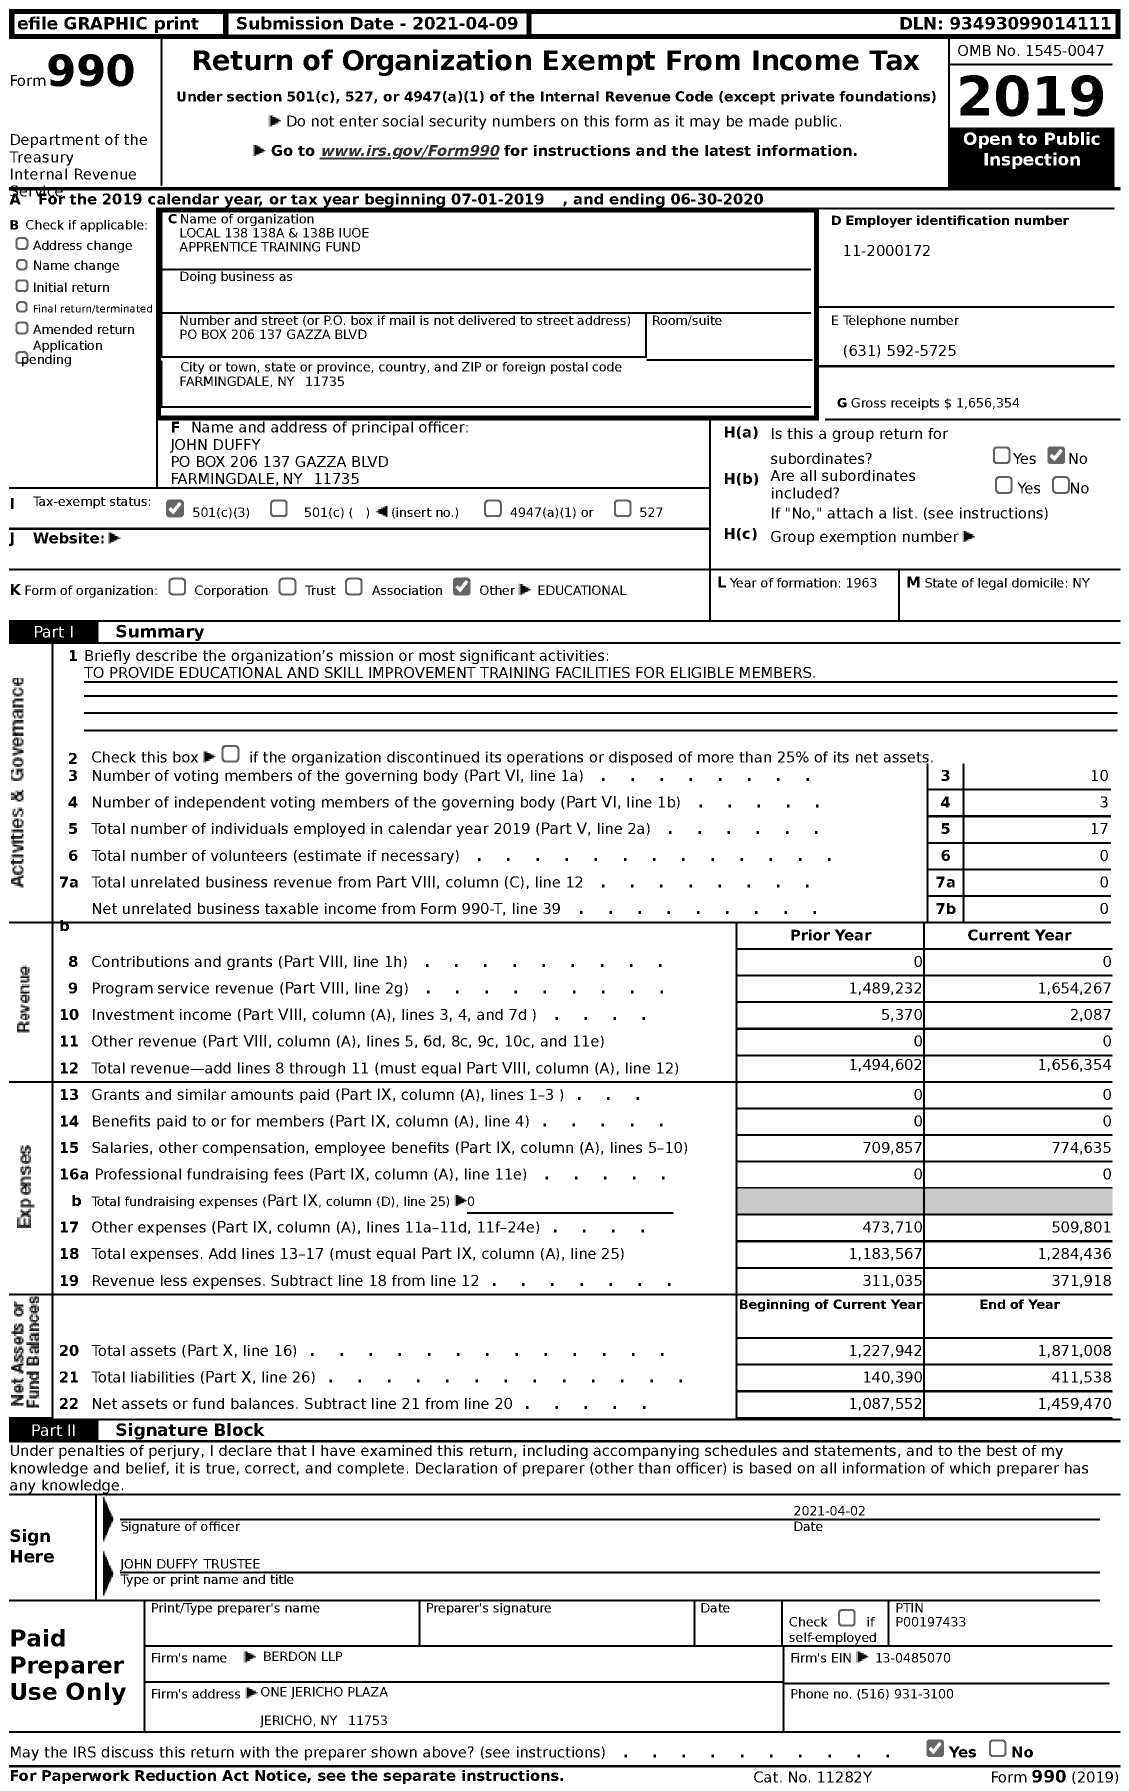 Image of first page of 2019 Form 990 for Local 138 138a and 138b Iuoe Apprentice Training Fund